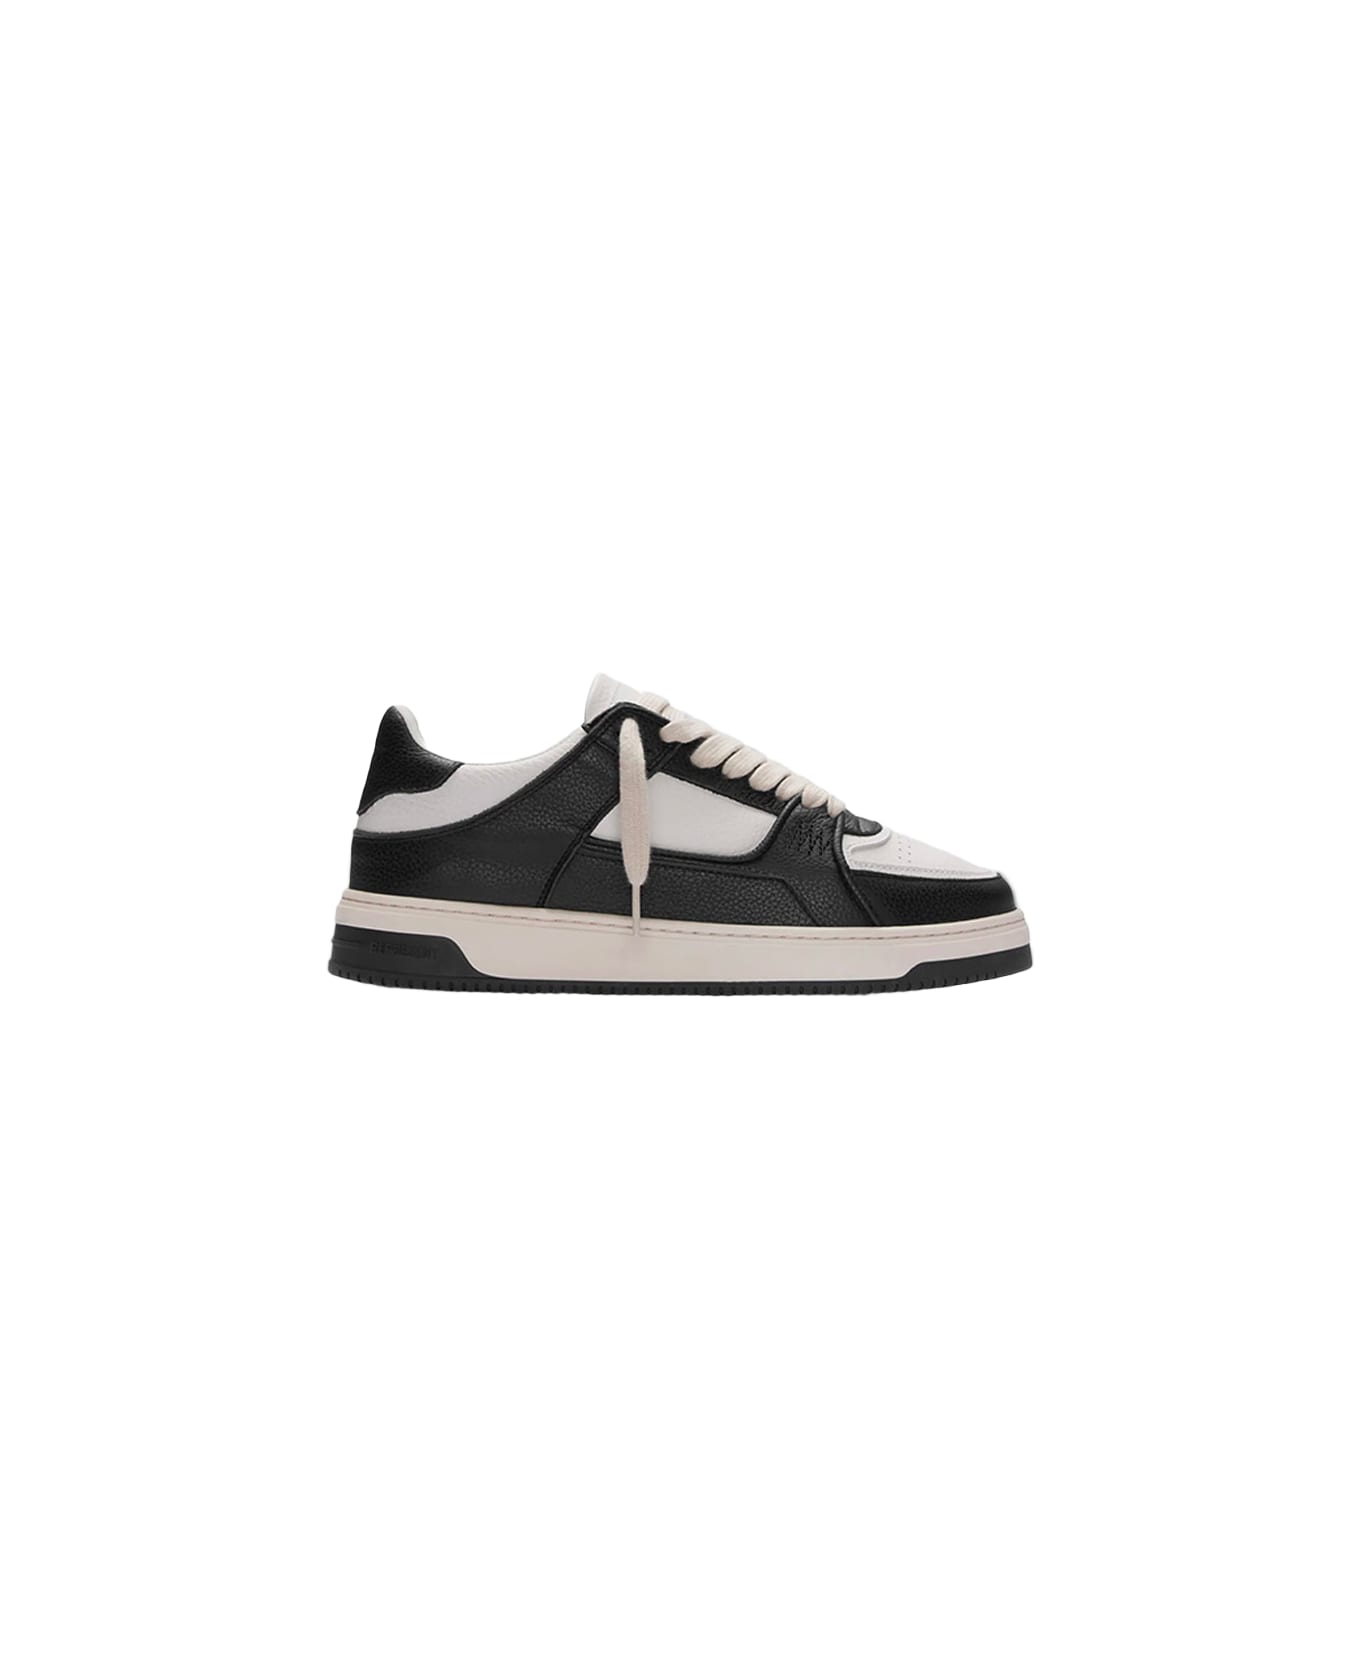 REPRESENT Apex Off White And Black Leather Low Top Sneaker - Apex - Black スニーカー